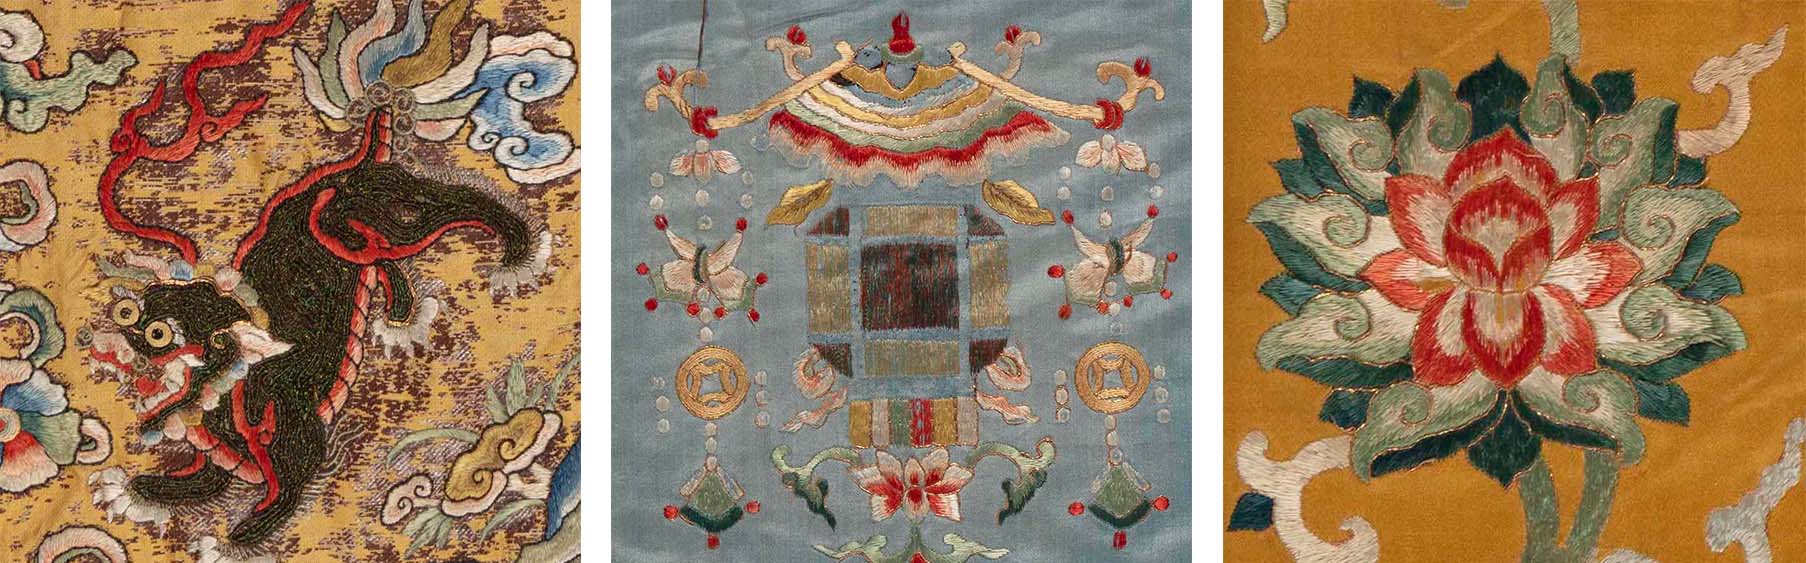 Three separate images - one of a black lion, a blue lantern, and a pink and blue lotus - all embroidered onto the silk buddhist priest robe.